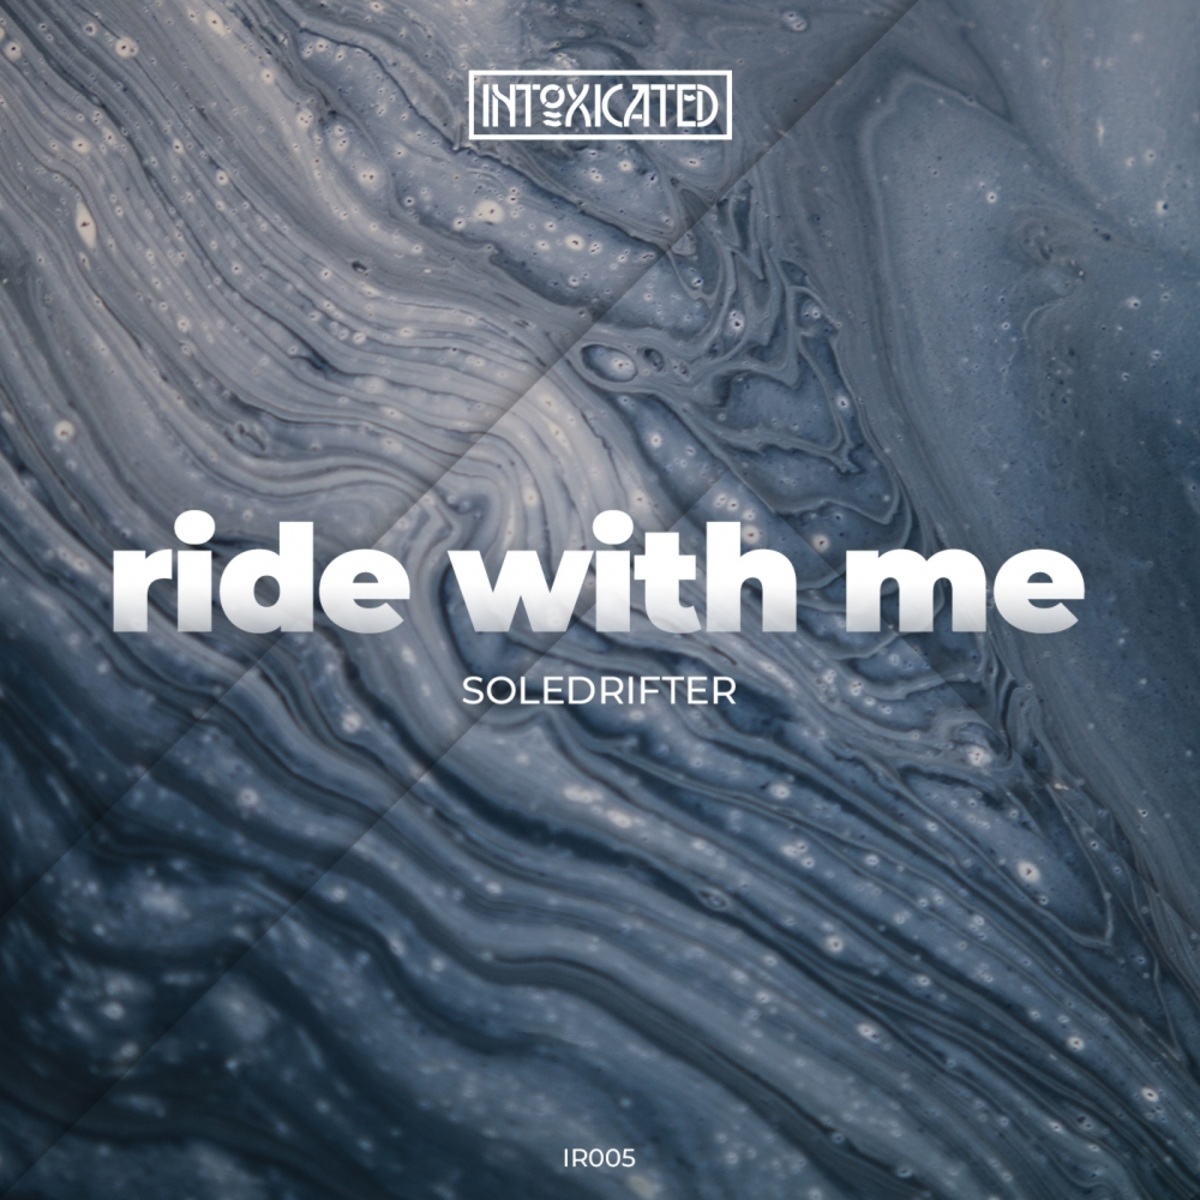 Soledrifter - Ride With Me / Intoxicated